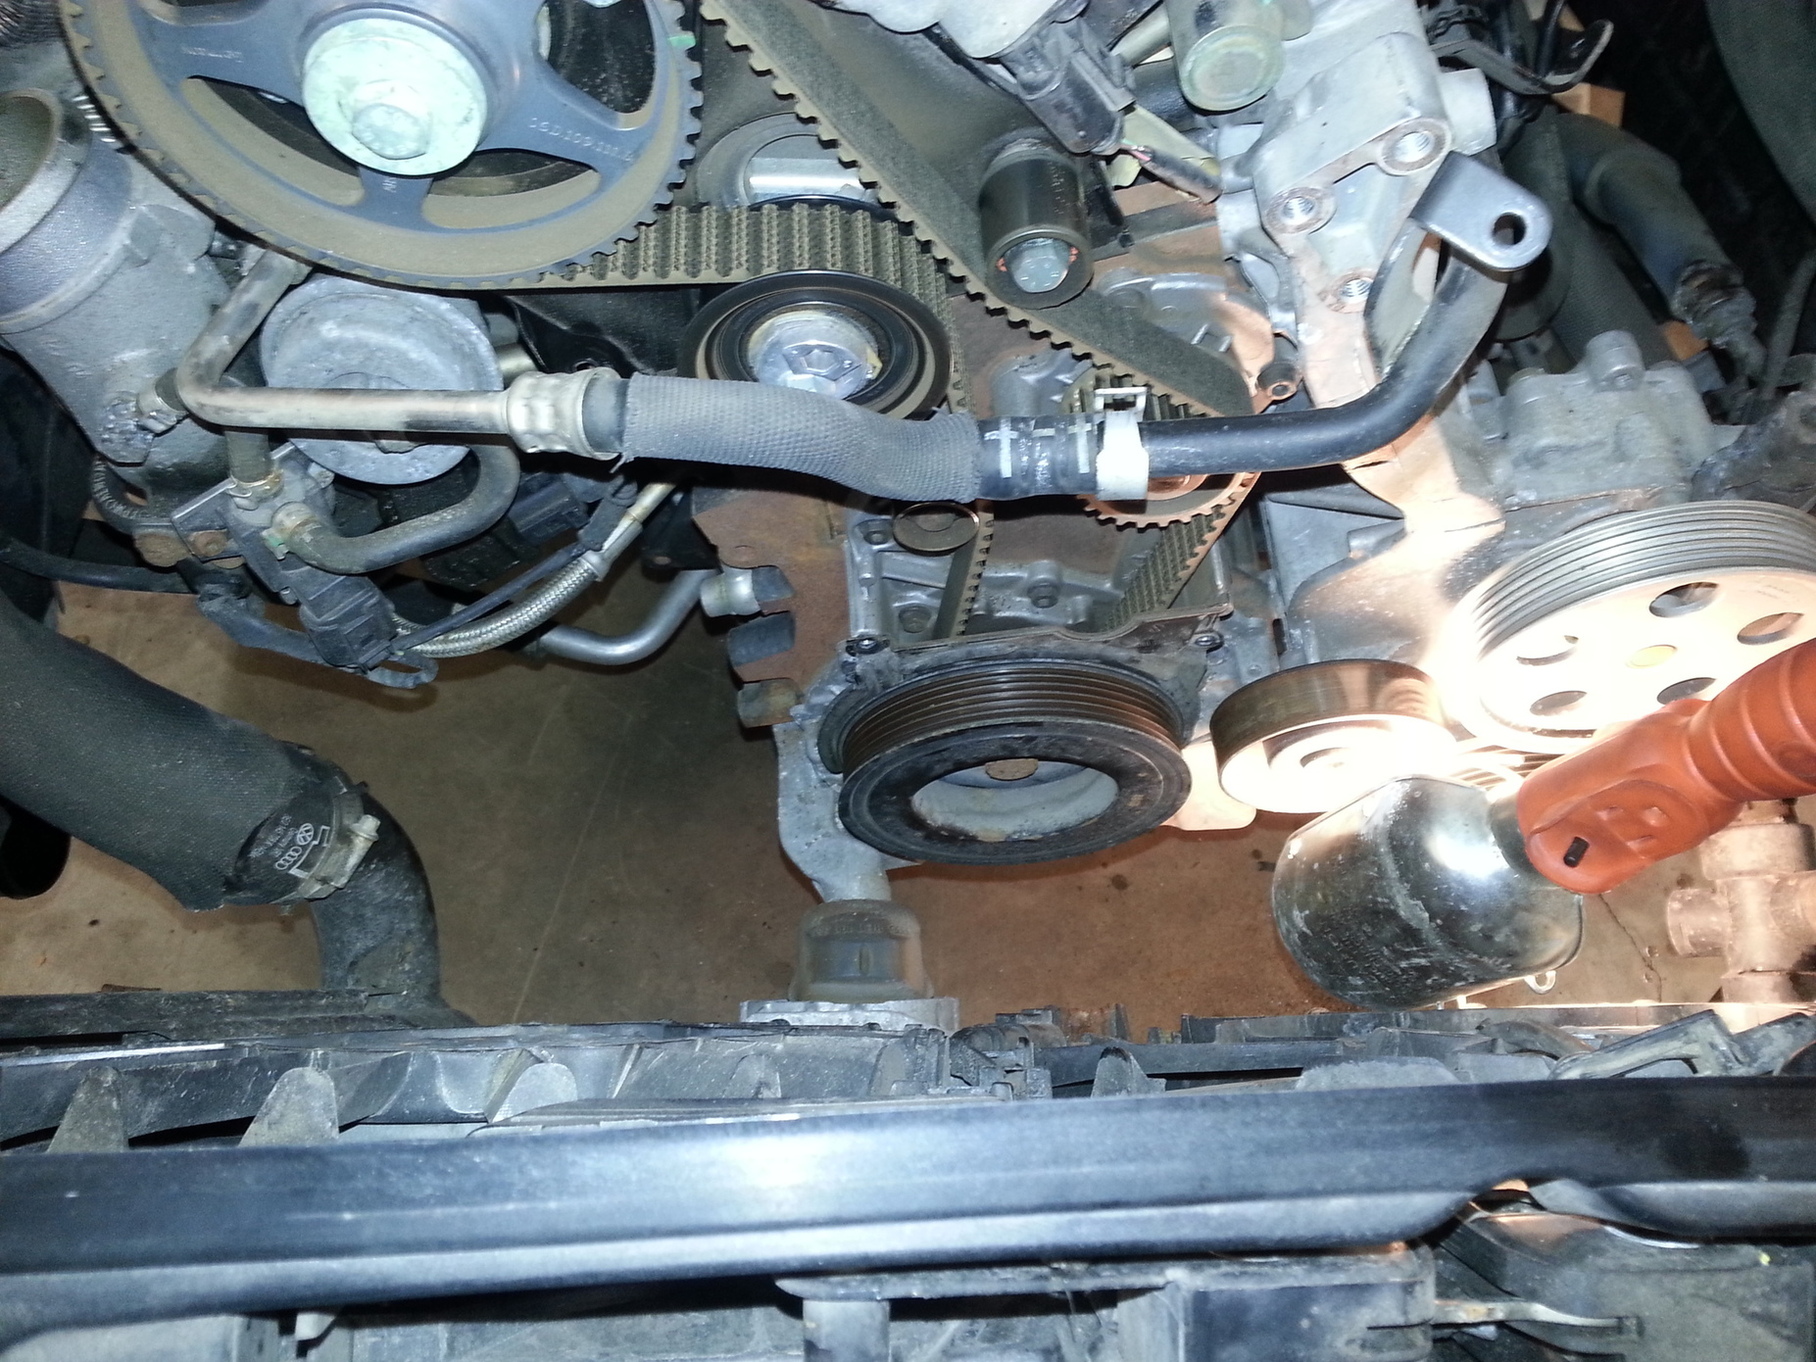 HELP!!! Stripped a 6mm bolt while doing my Timing Belt! - AudiForums.com